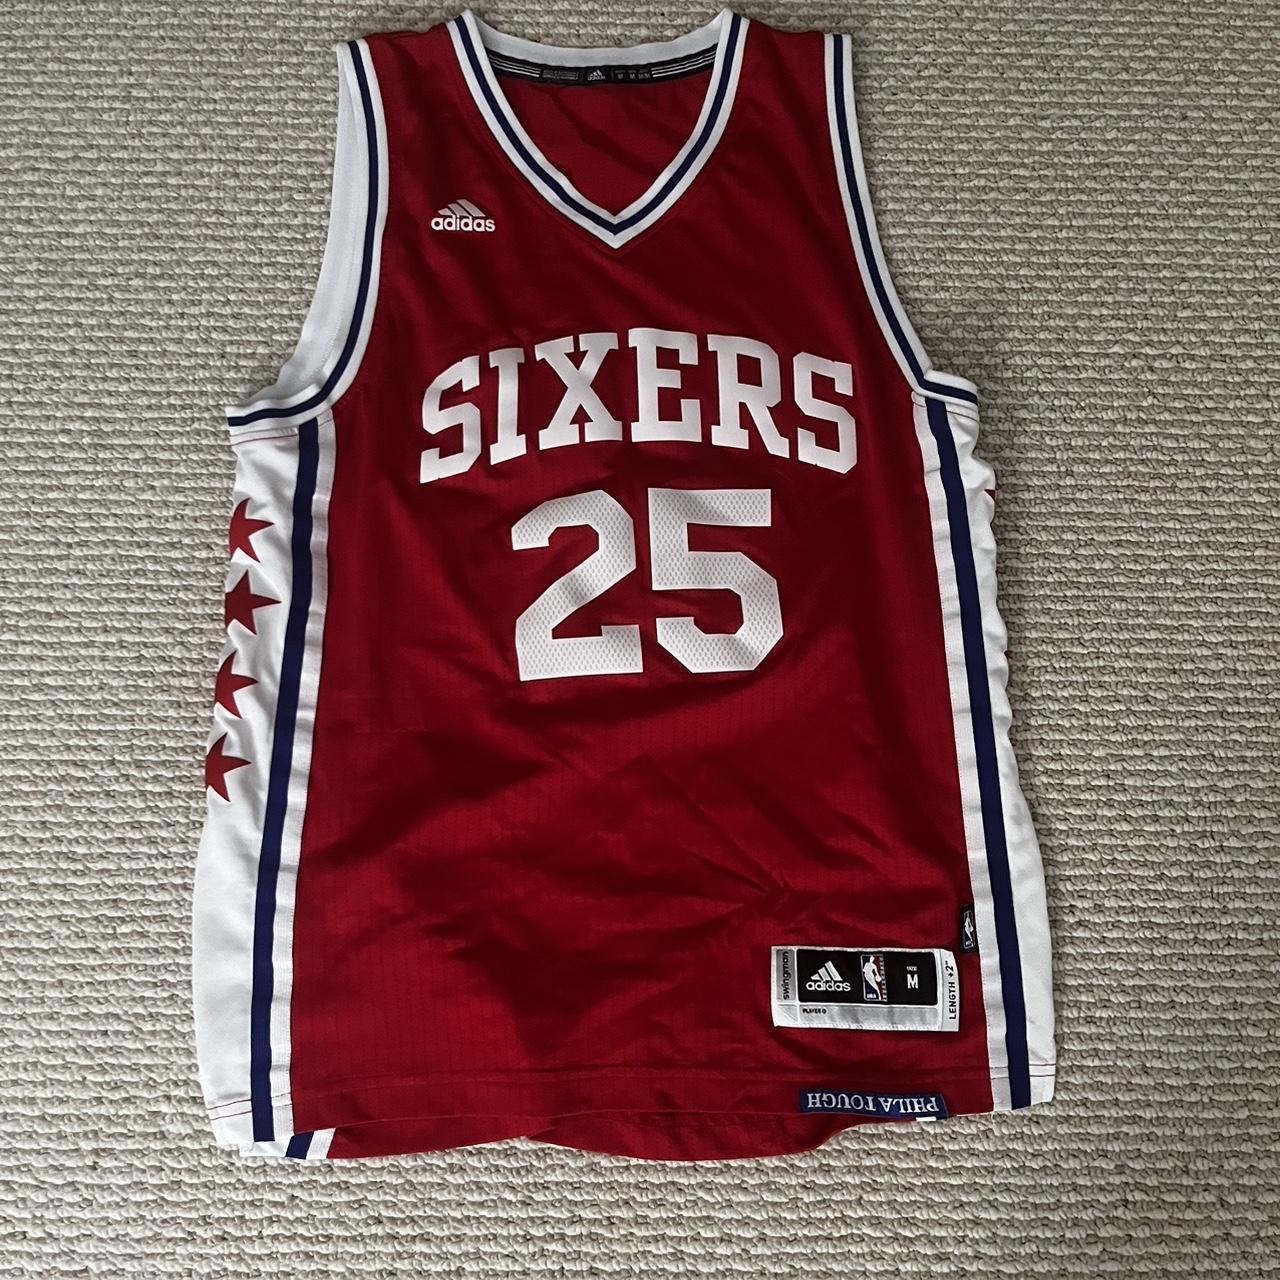 sixers red jersey